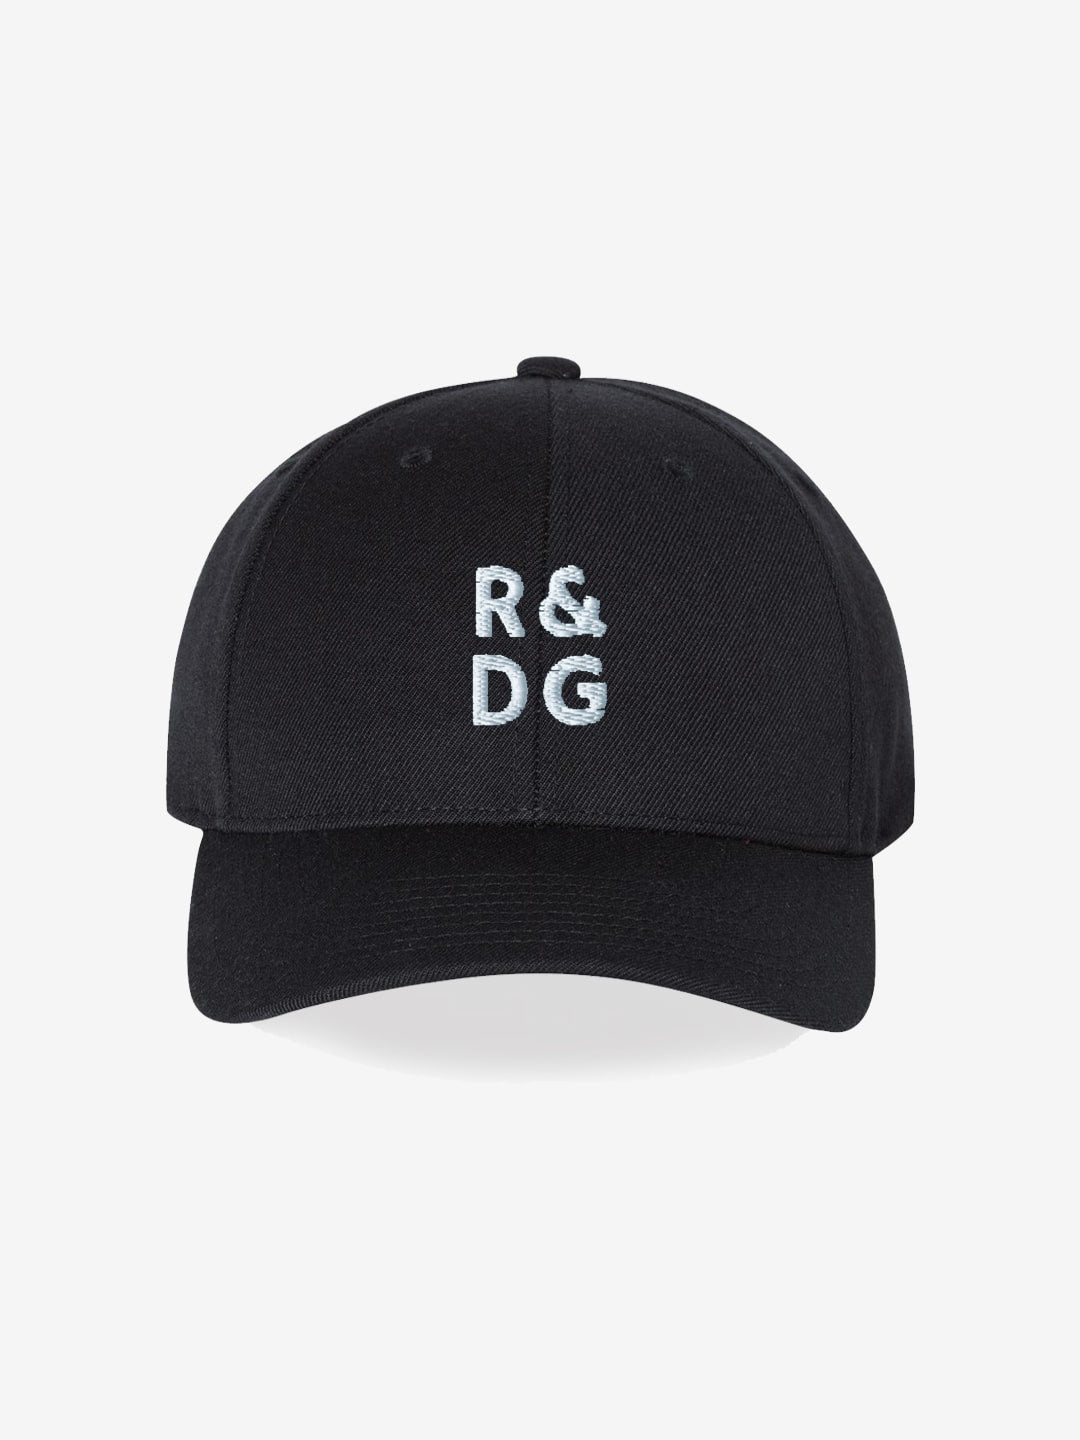 Rejoice & Do Good is based on Ecclesiastes 3:12.  Black hat with buckle closure or snapback options. 